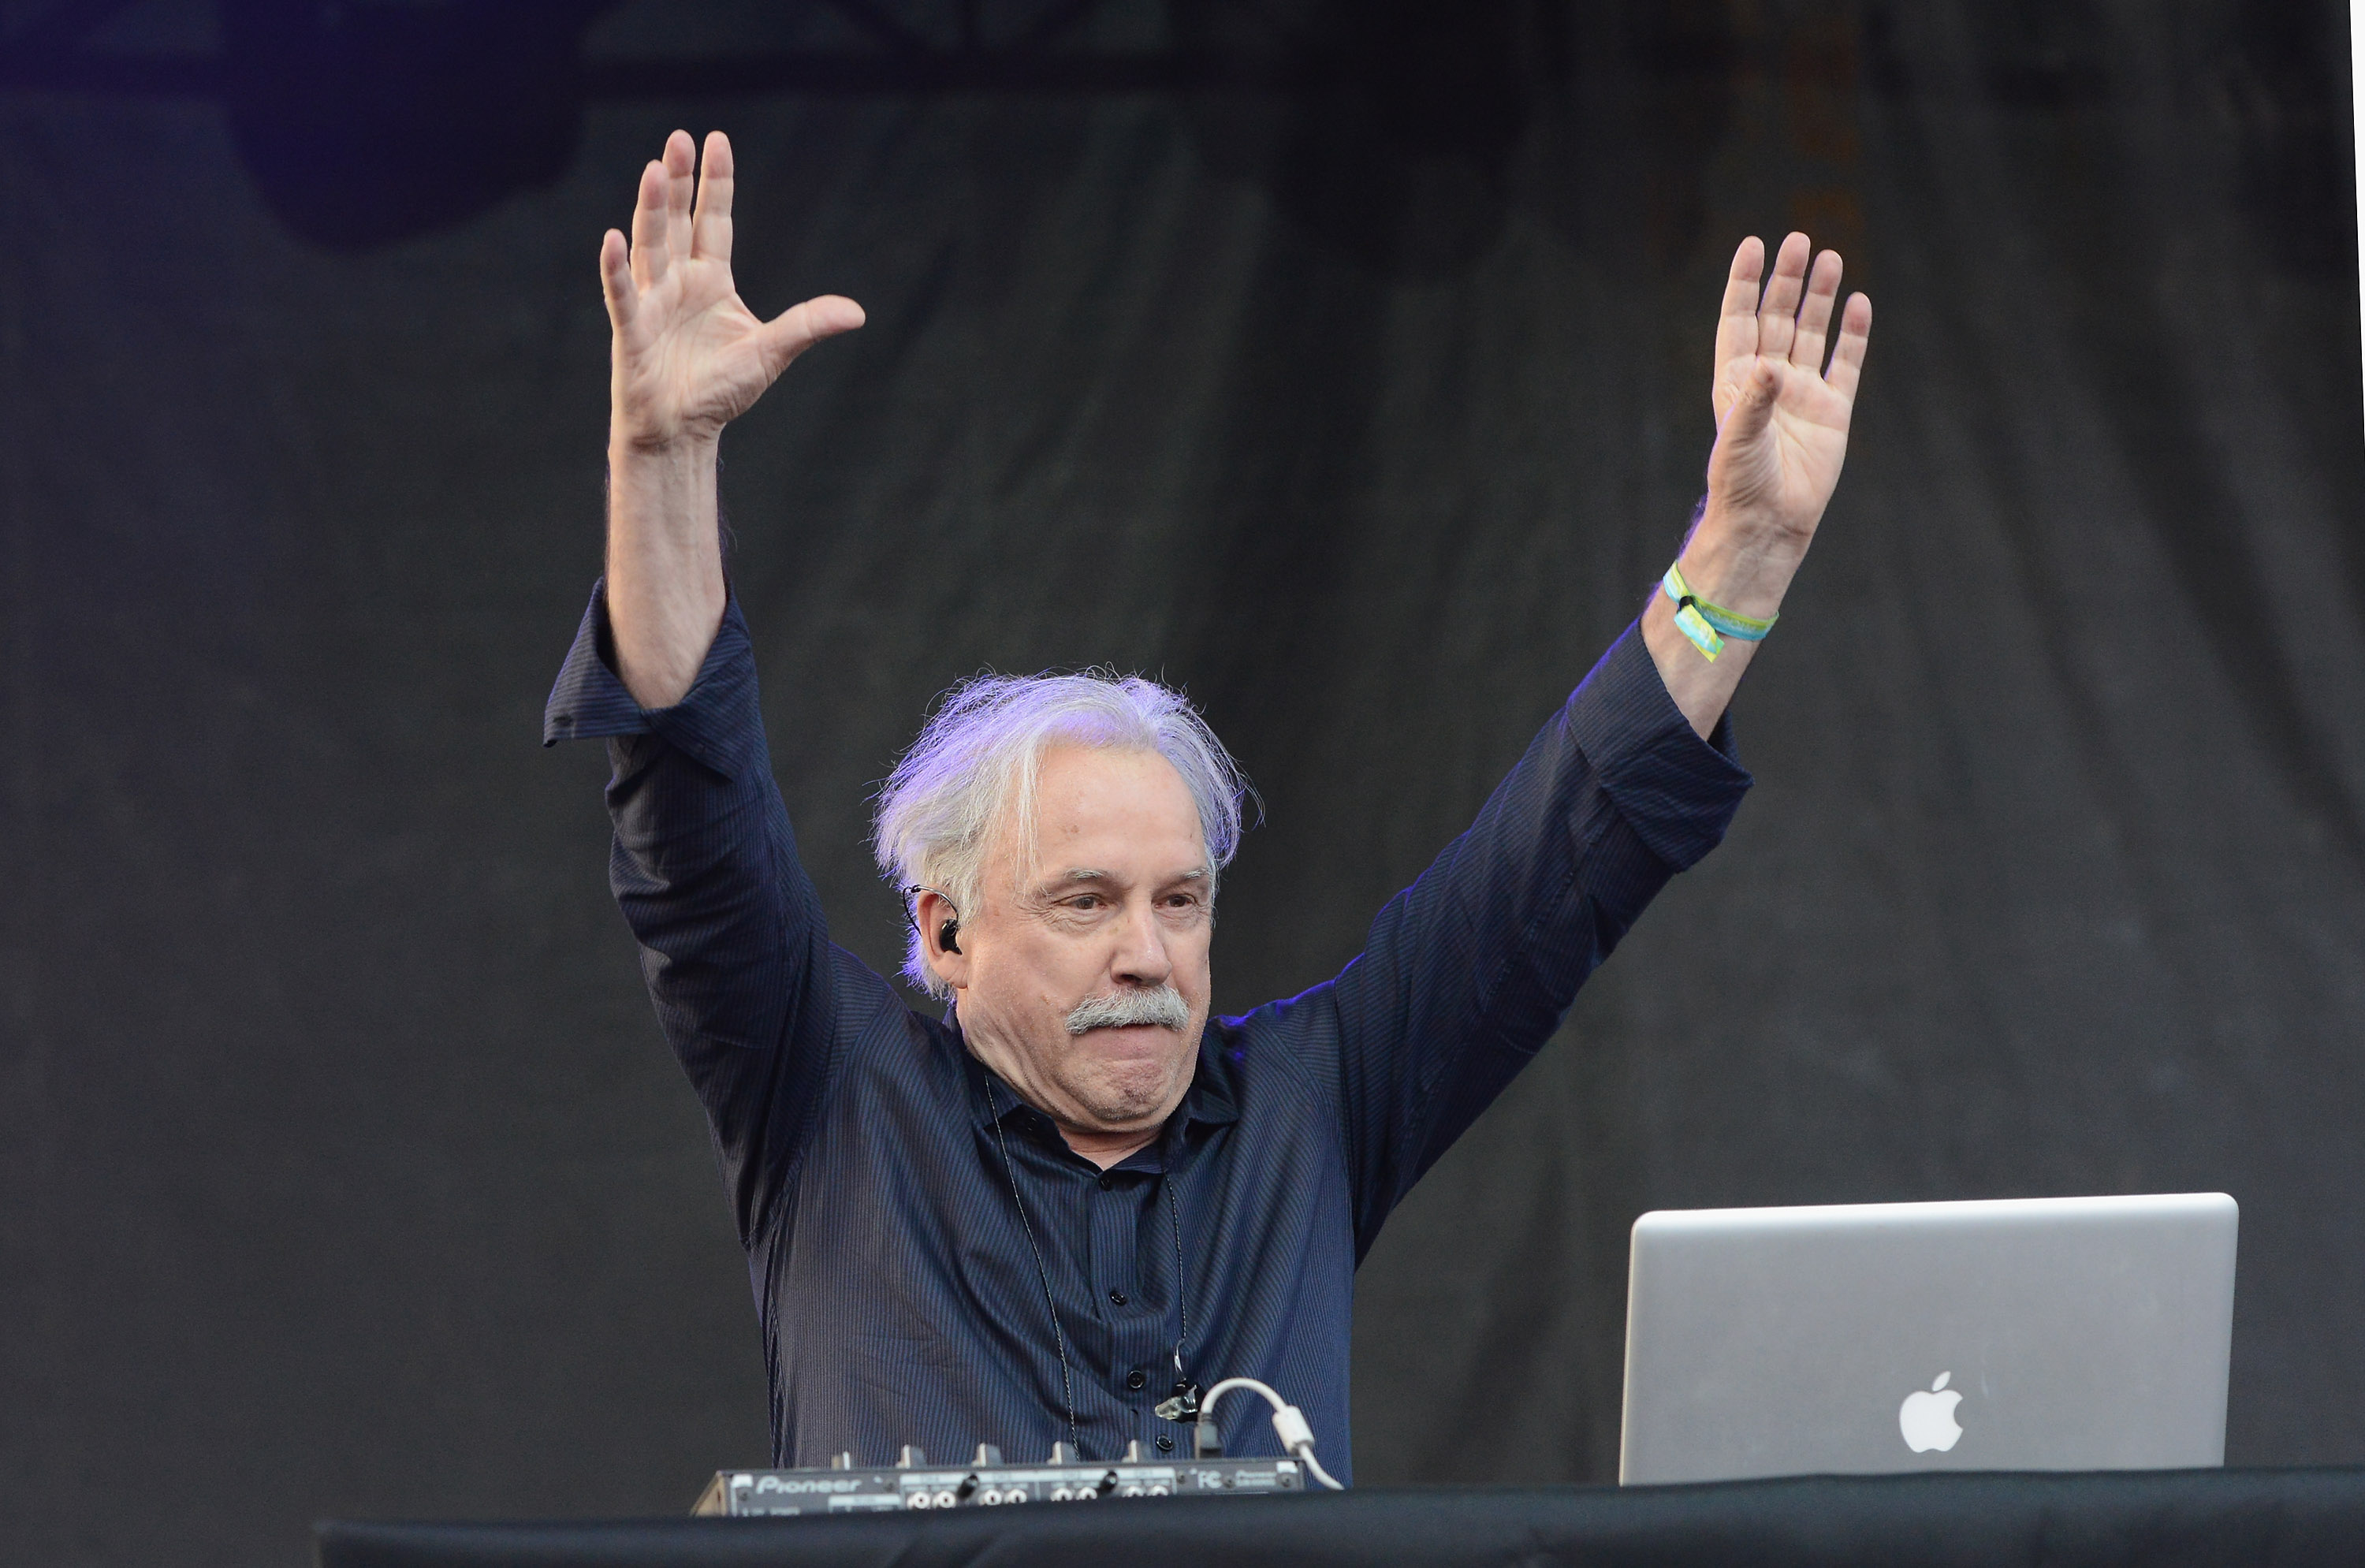 POP Montreal 2015 Lineup: Giorgio Moroder, Will Butler, Mikal Cronin, and More